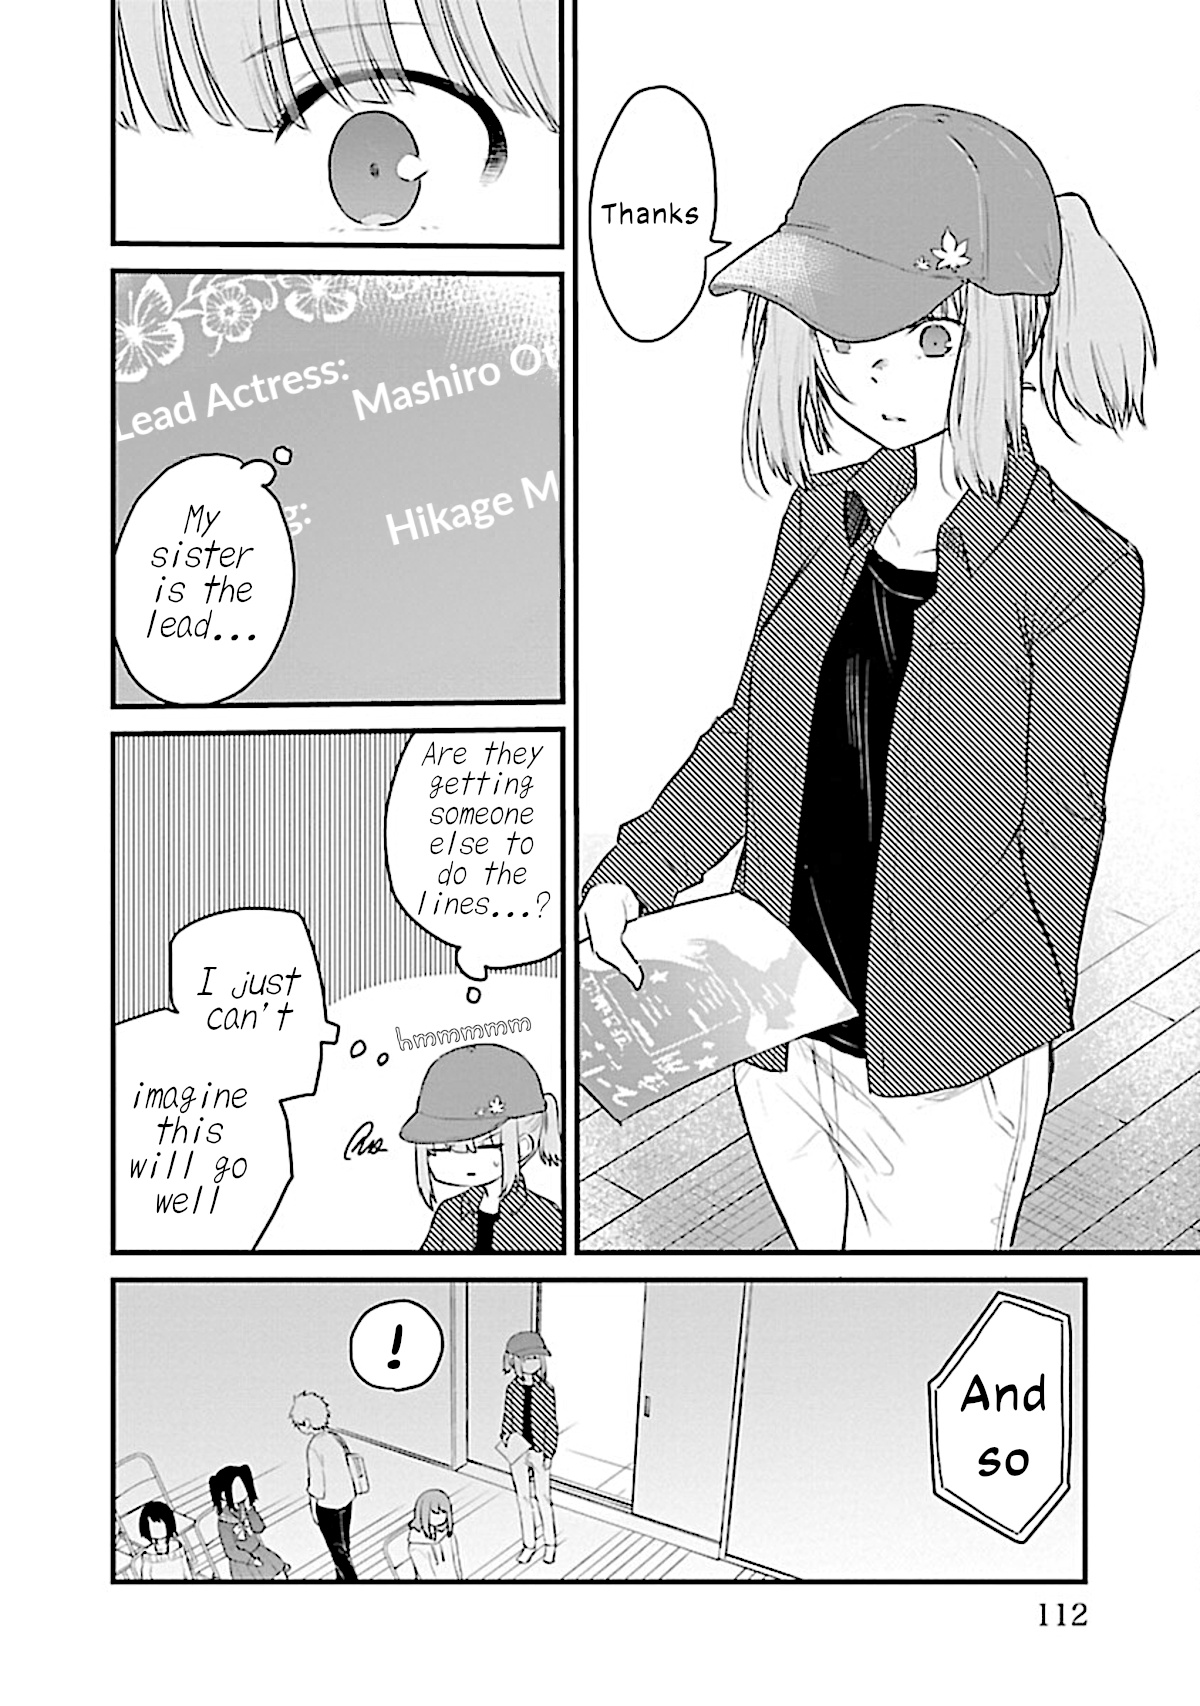 The Mute Girl And Her New Friend (Serialization) - Page 4